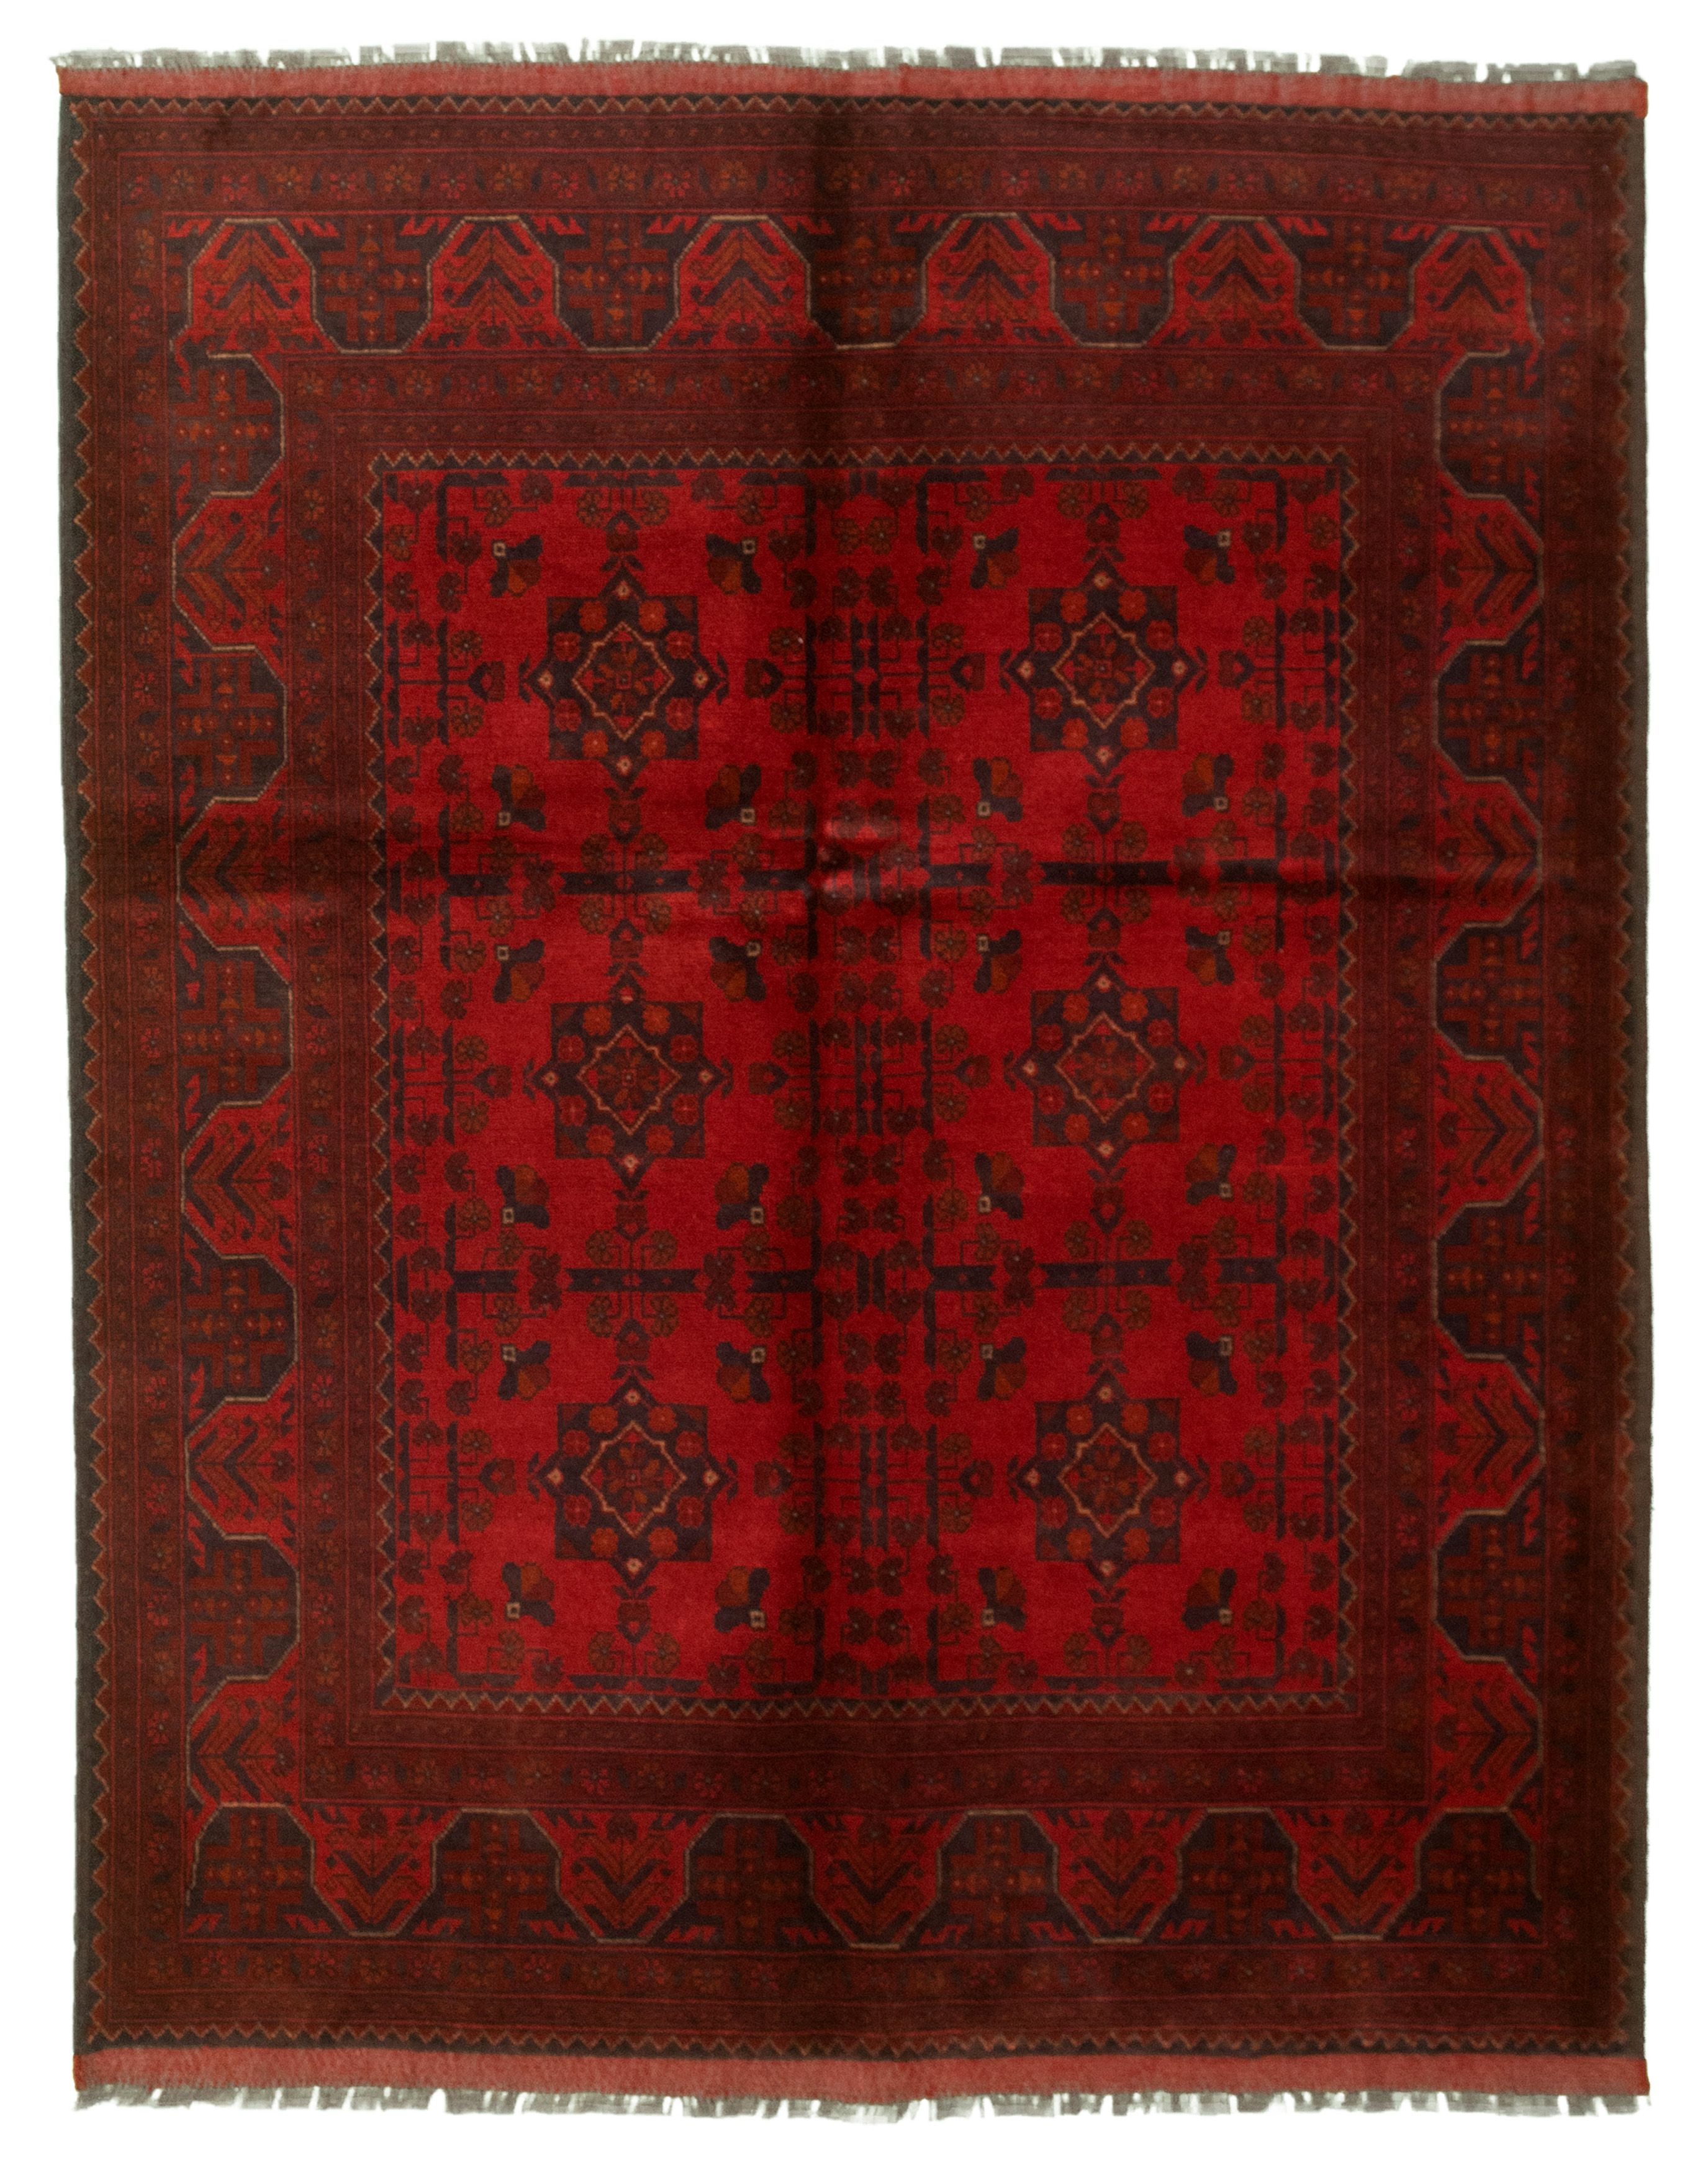 eCarpet Gallery Red Area Rug 329606 3'4 x 4'10 Bordered